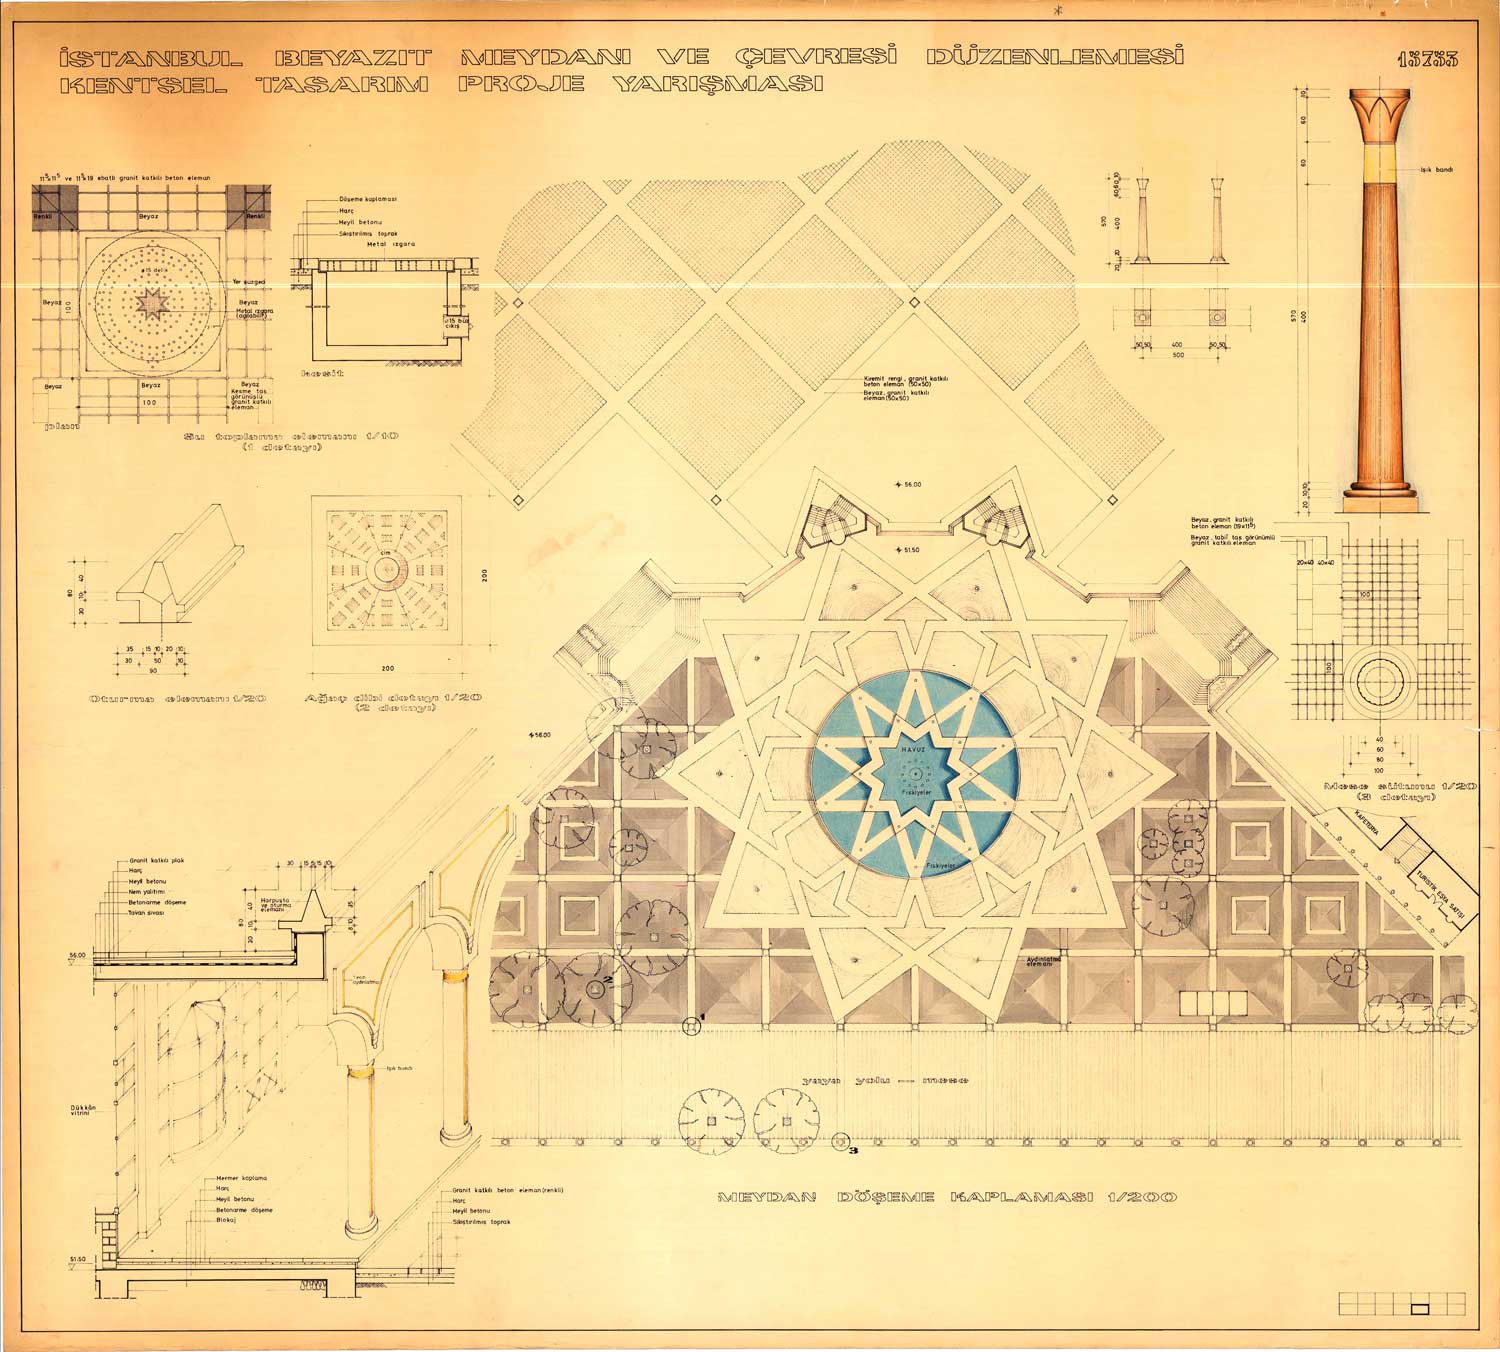 Beyazit Square, Urban Design Competition 1987. Plan of the pool and fountain, by Fatma Vedia Dökmeci and Yaprak Karlıdağ.